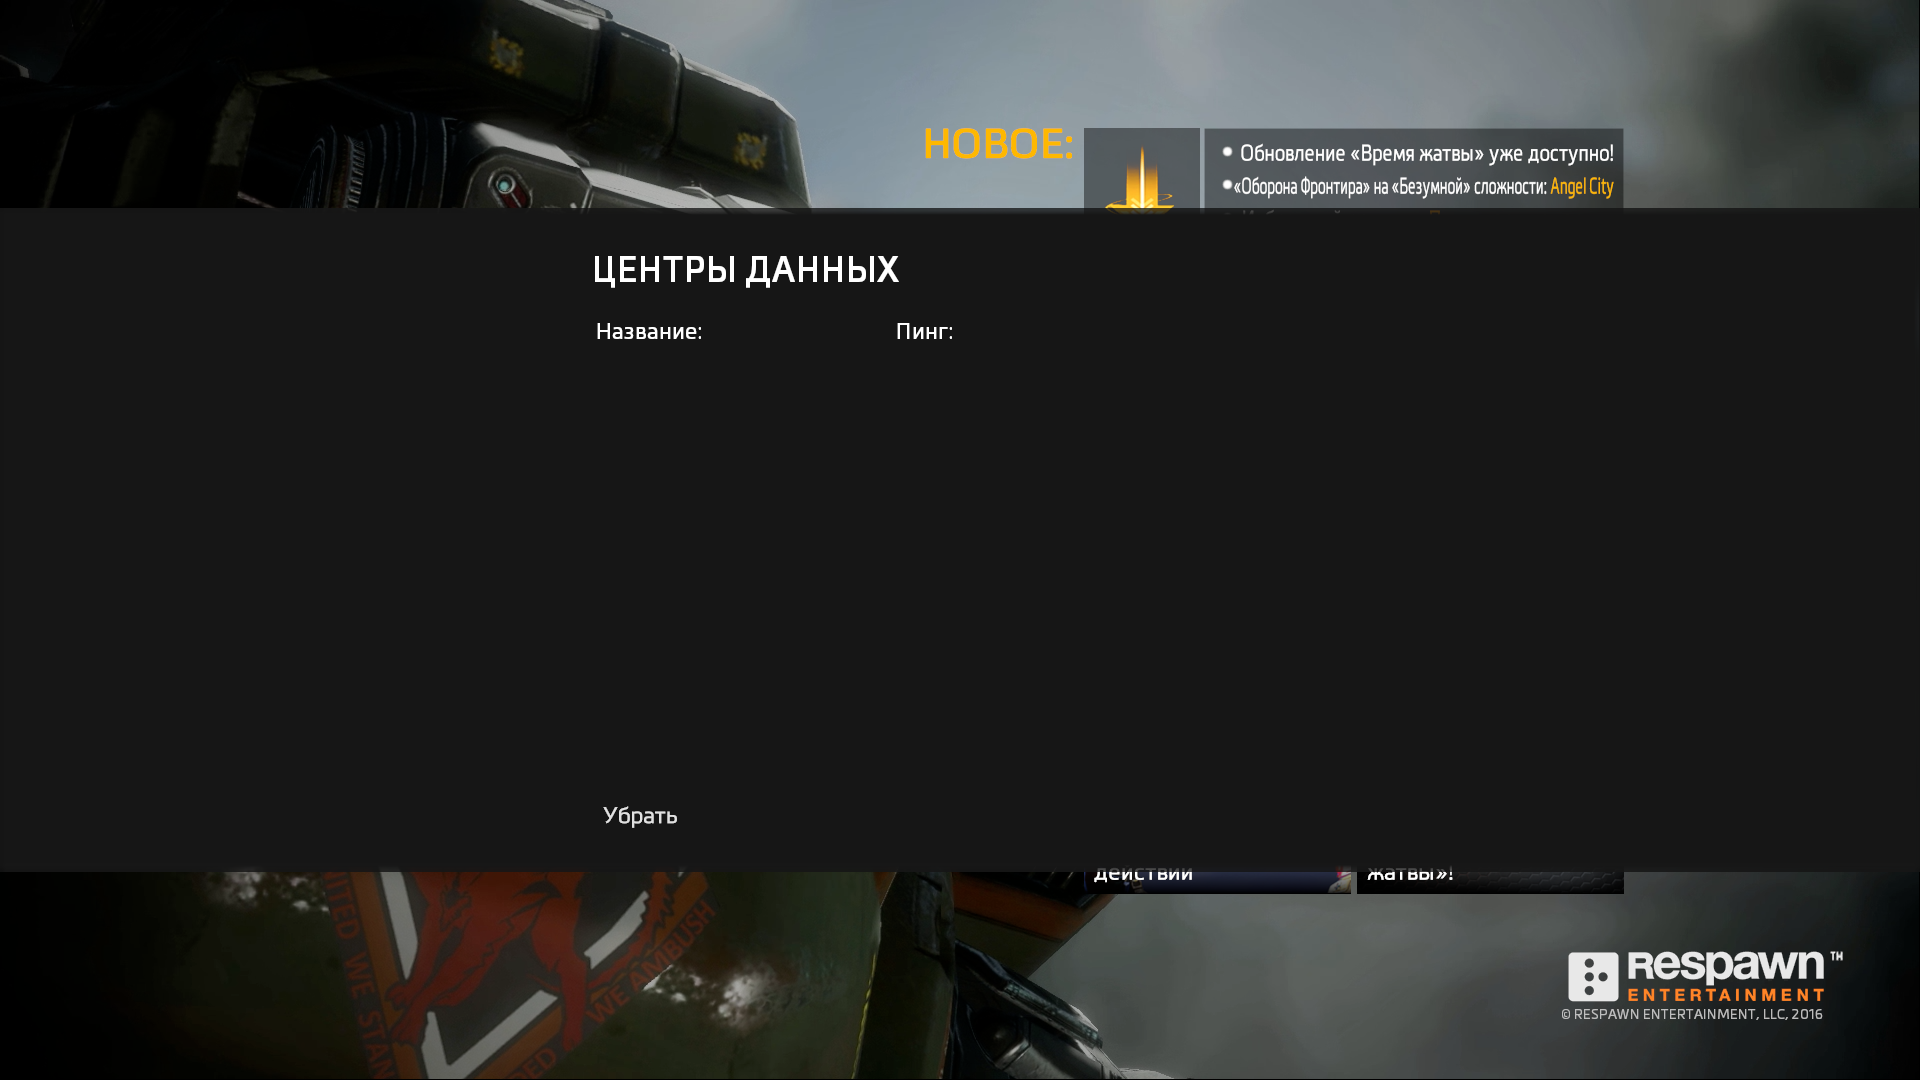 Titanfall 2 and Apex legends blocked in Bashkortostan [FAKE] - Roskomnadzor, Titanfall 2, Apex legends, Blocking